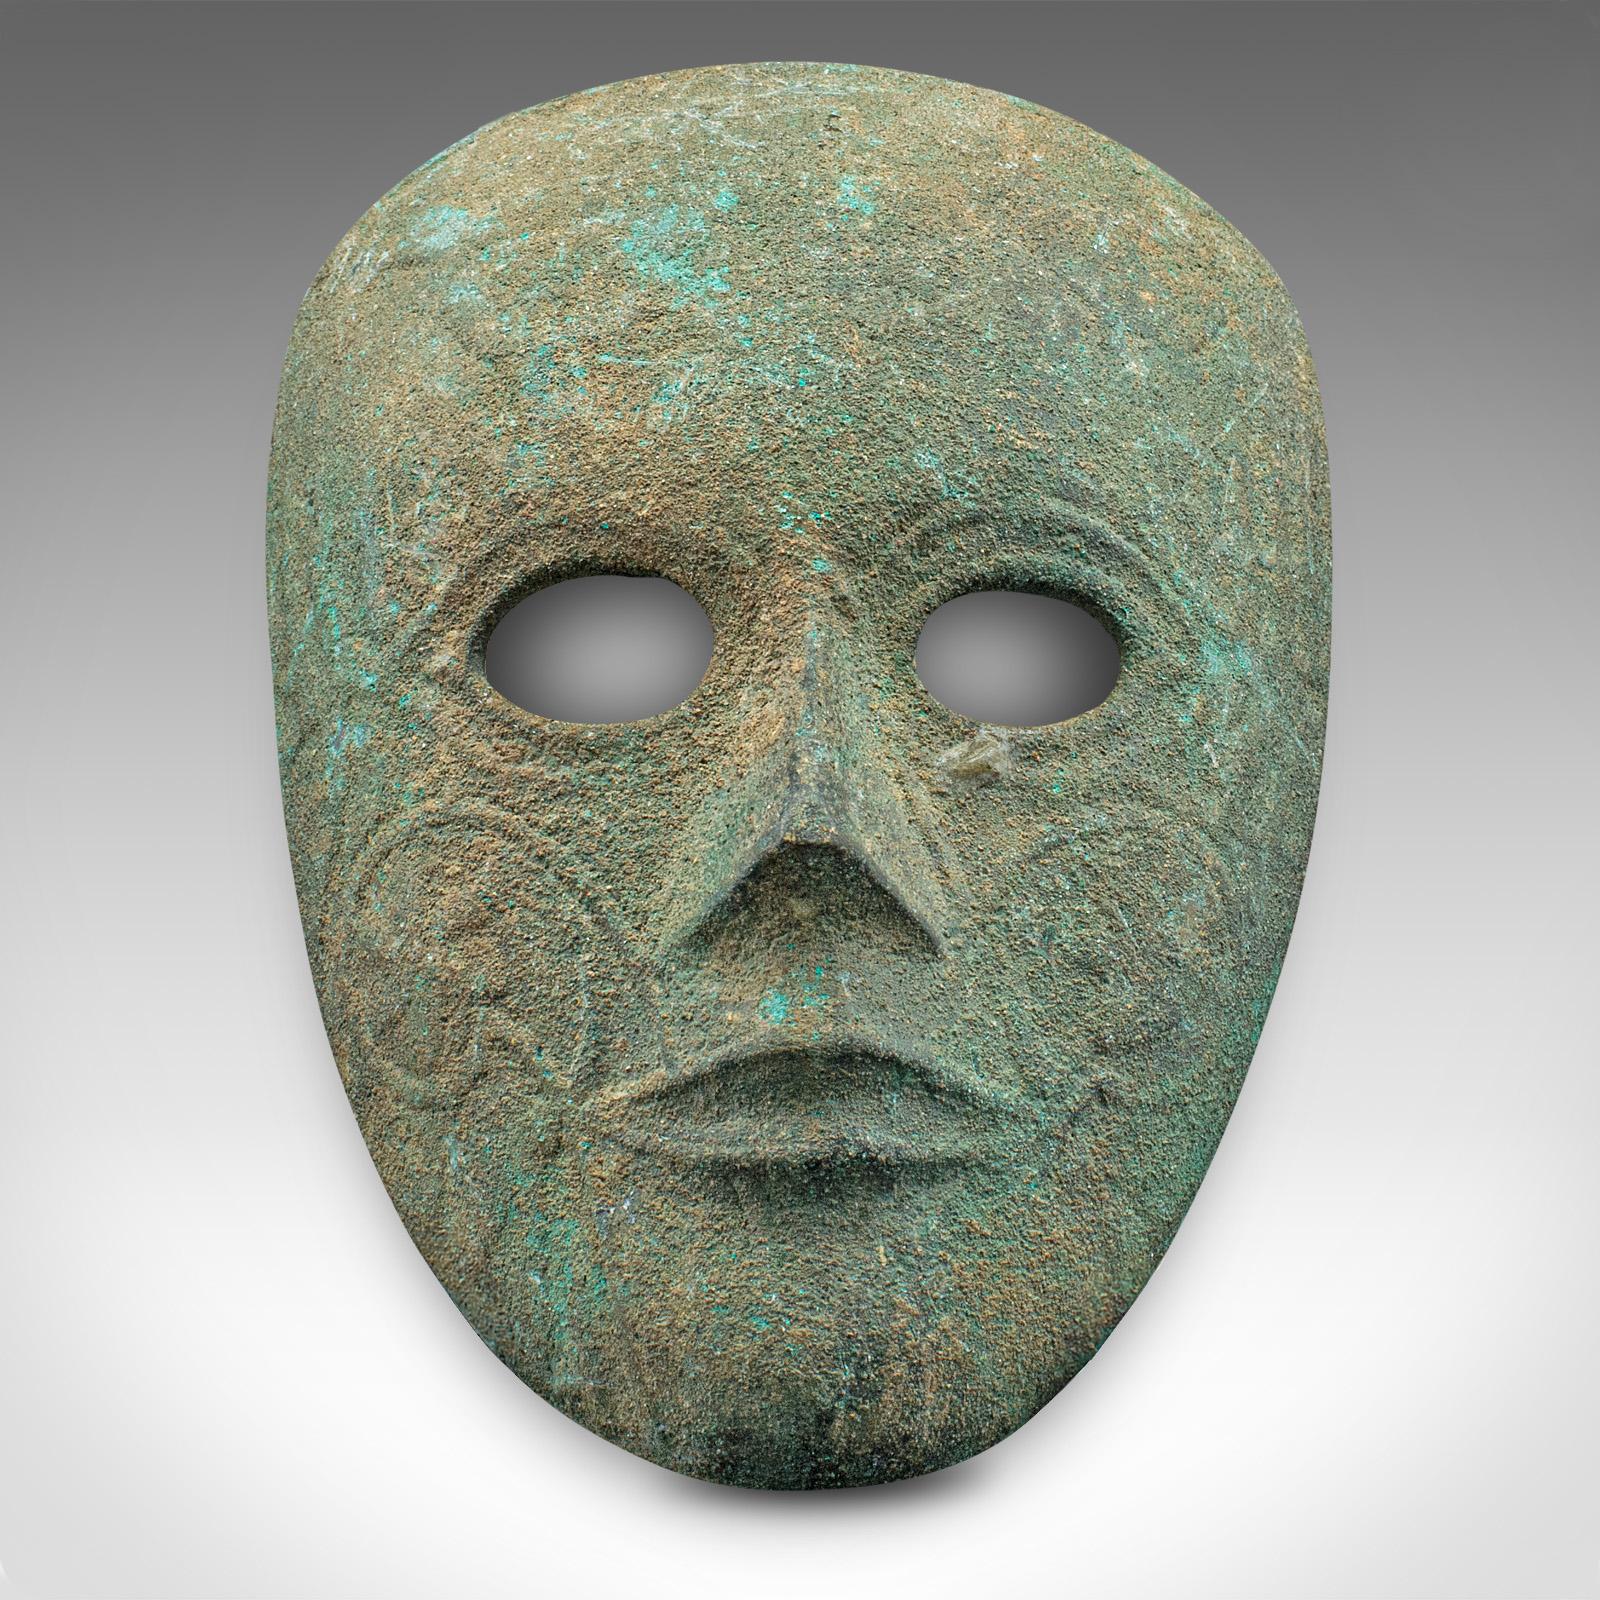 This is a small antique decorative mask. A Continental, weathered bronze mask with Eastern overtones, dating to the Georgian period, circa 1800.

Fascinating bronze mask with appealing weathering
Displays a desirable aged patina in good original